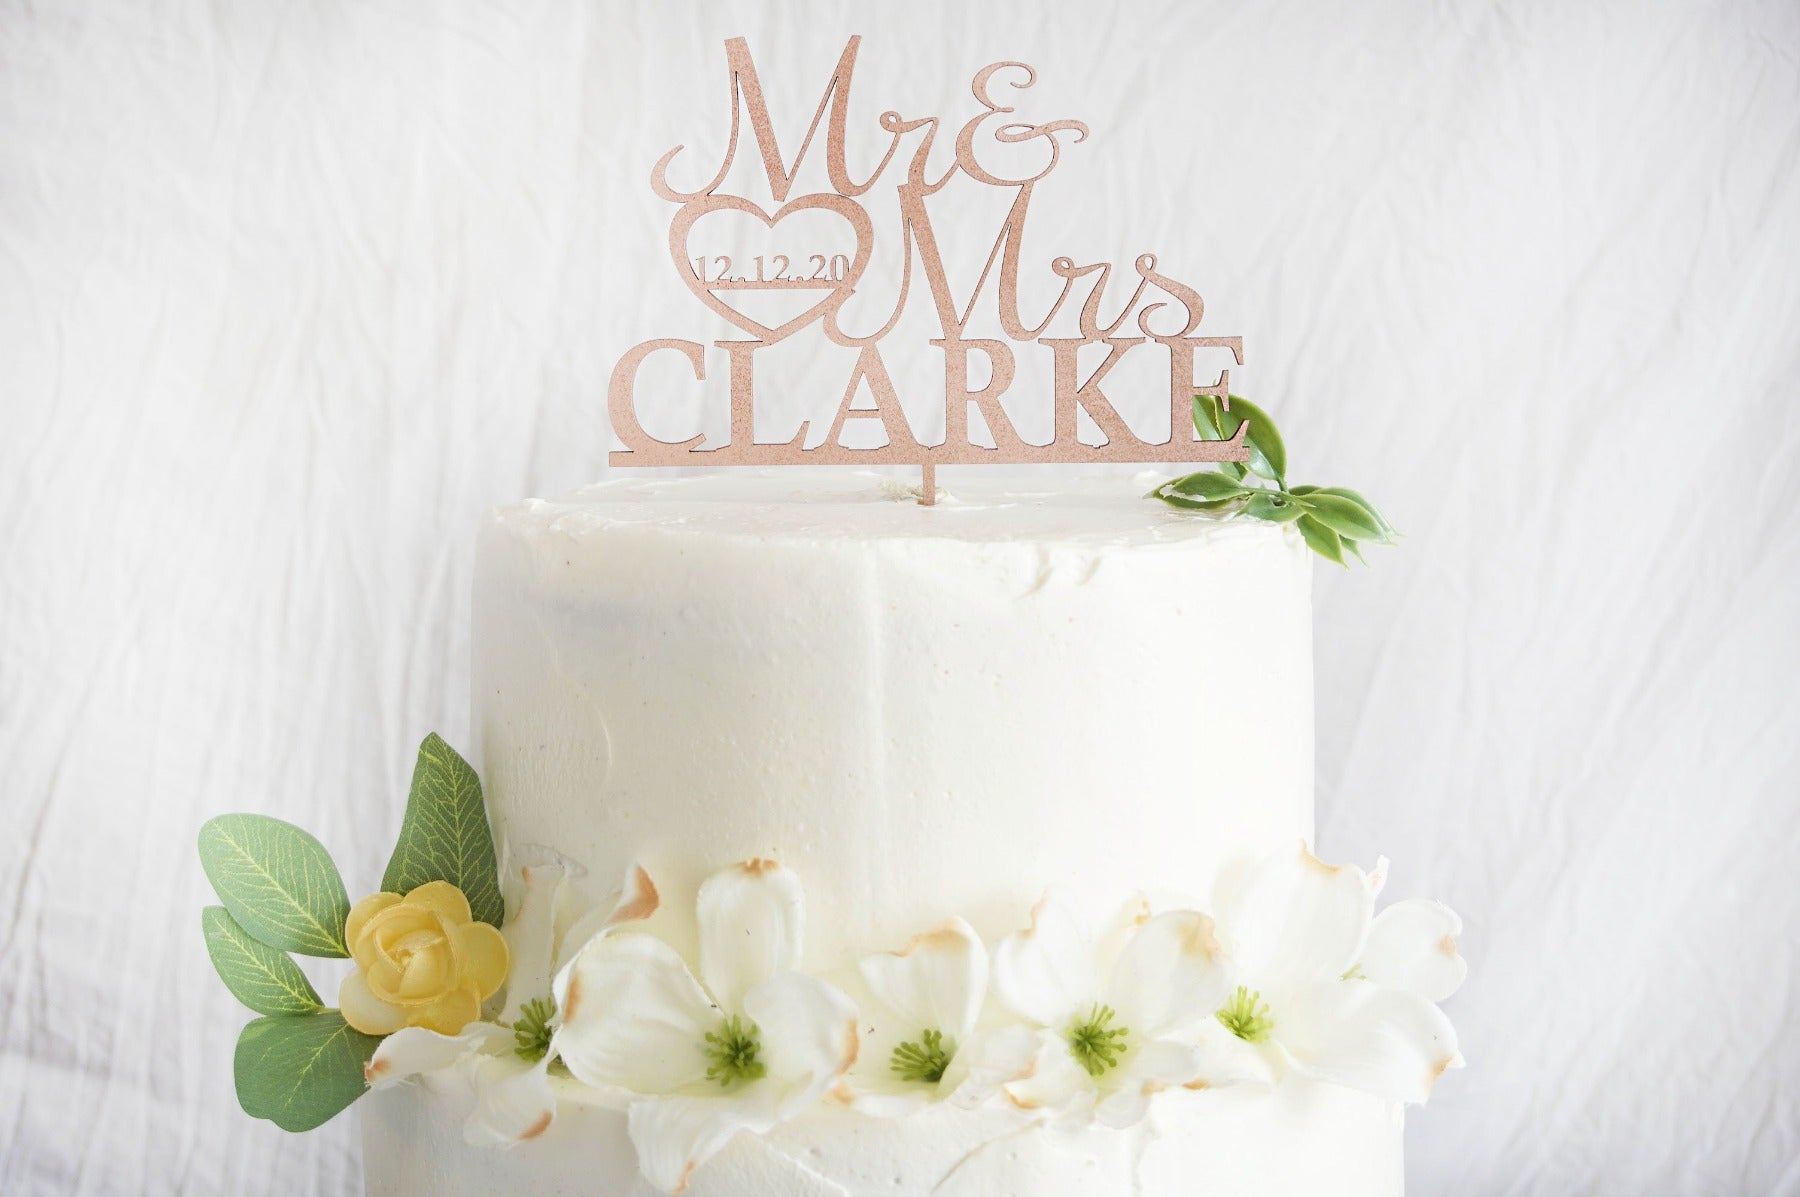 Buy personalised cake toppers & cake decorations online in